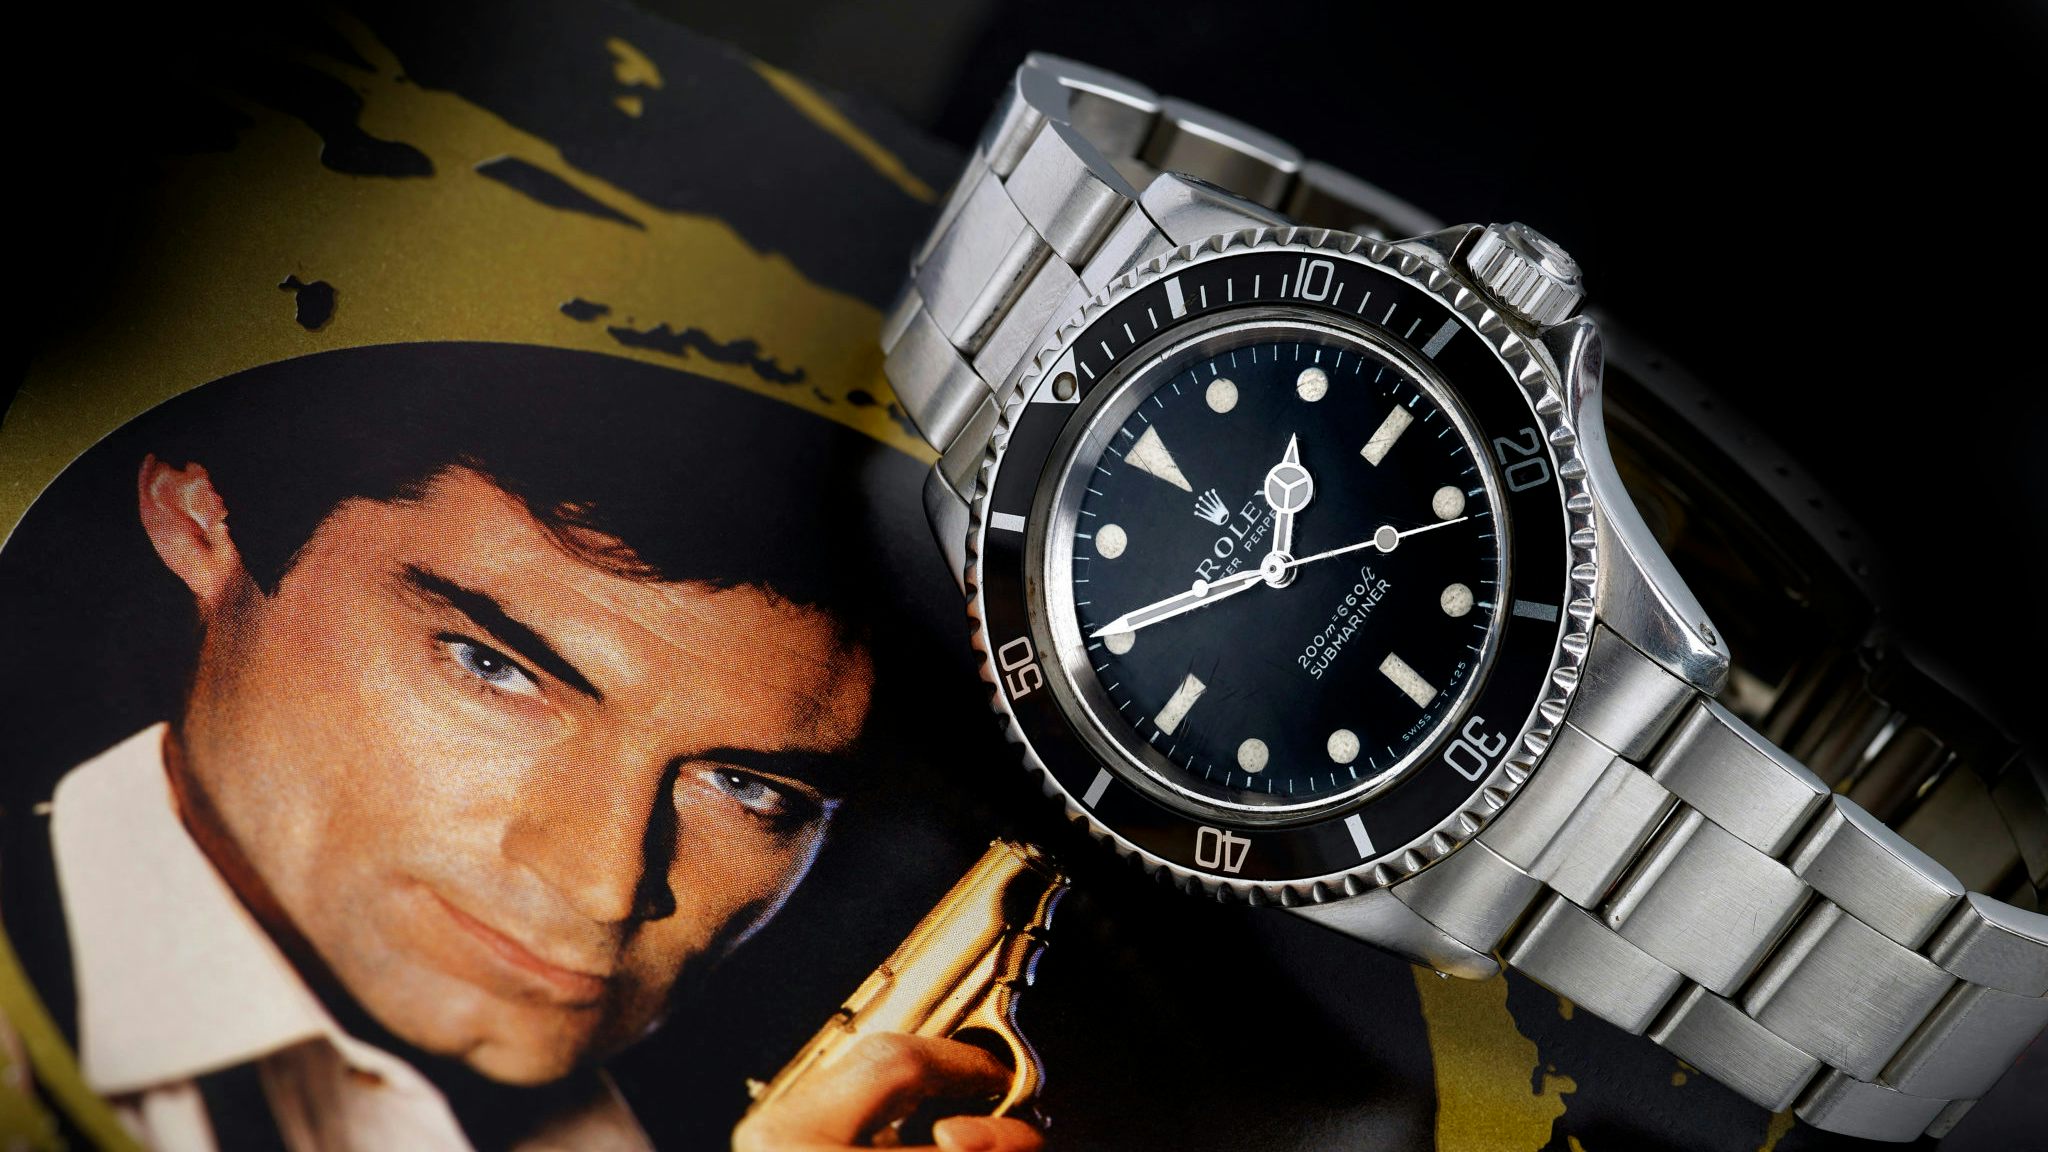 Rolex Oyster Perpetual 'James Bond' Submariner -Tropical Dial